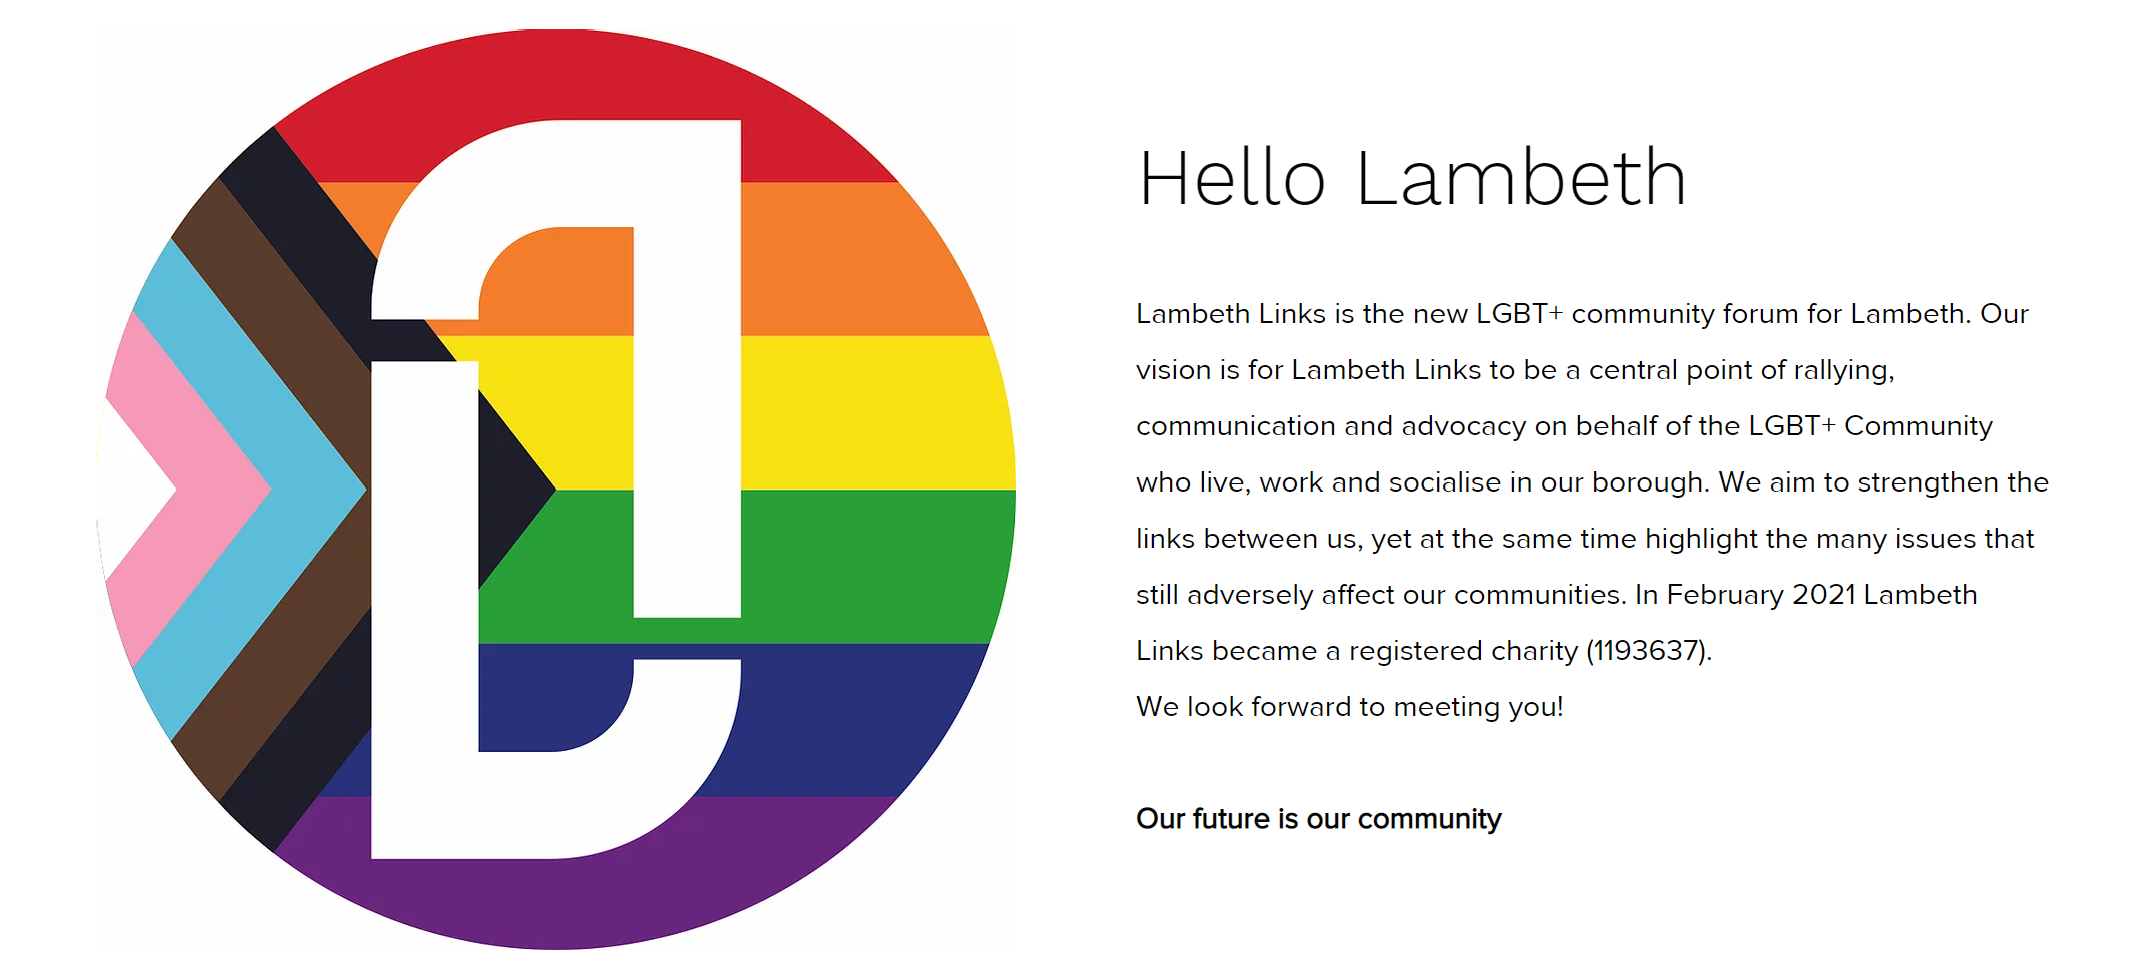 Web banner with Lambeth links logo on the left and a welcome message to the lambeth LGBT community on the right